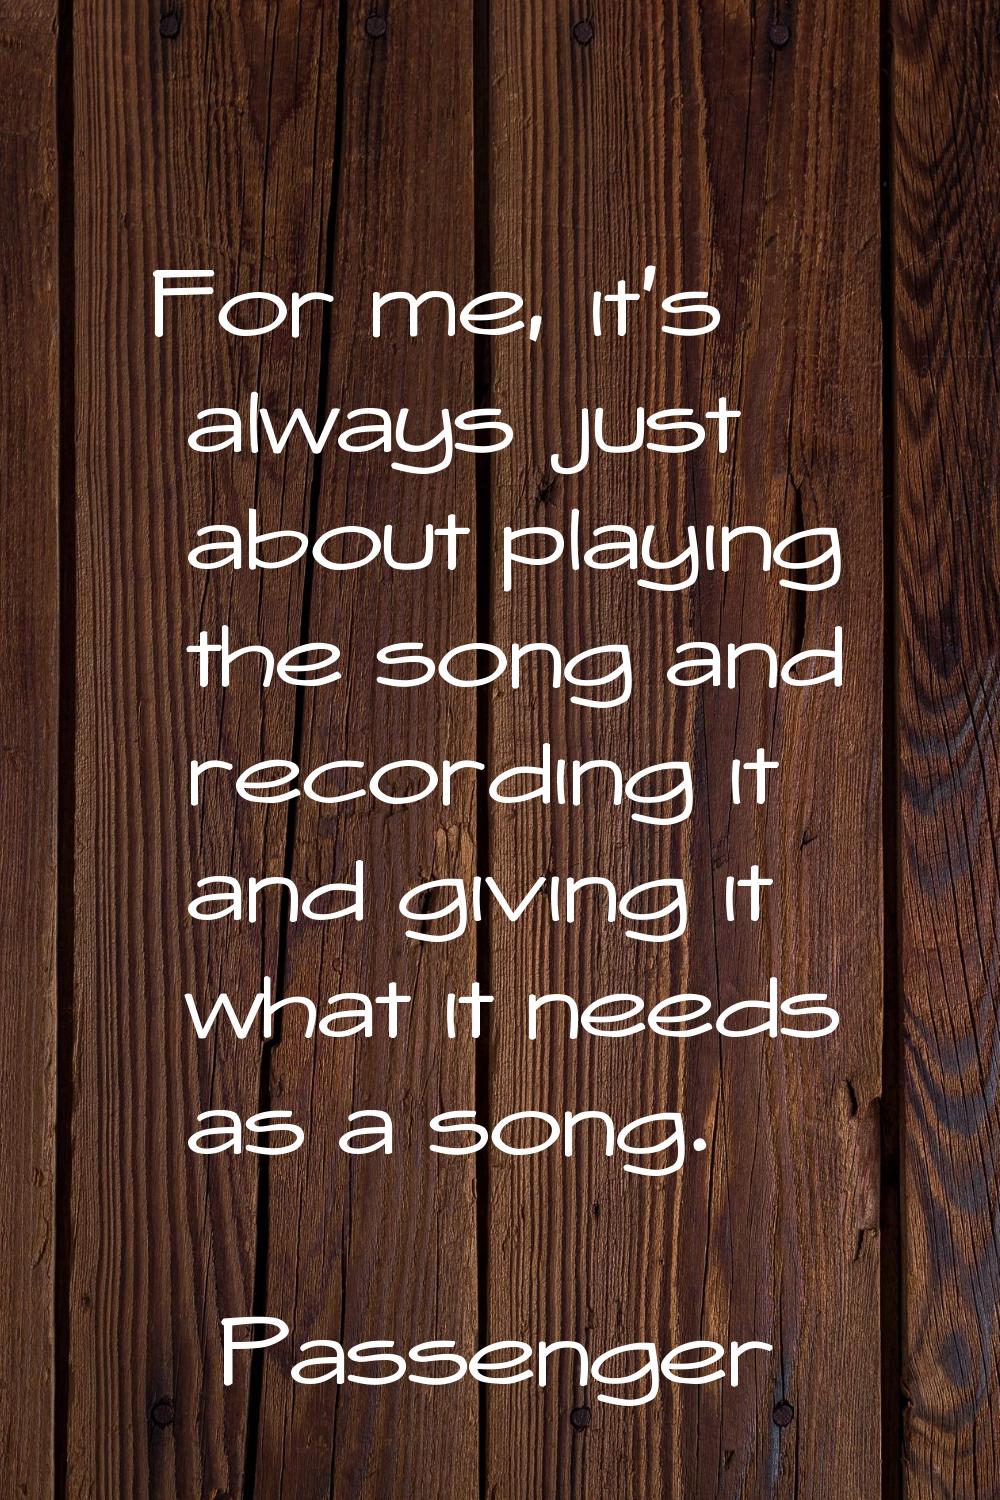 For me, it's always just about playing the song and recording it and giving it what it needs as a s